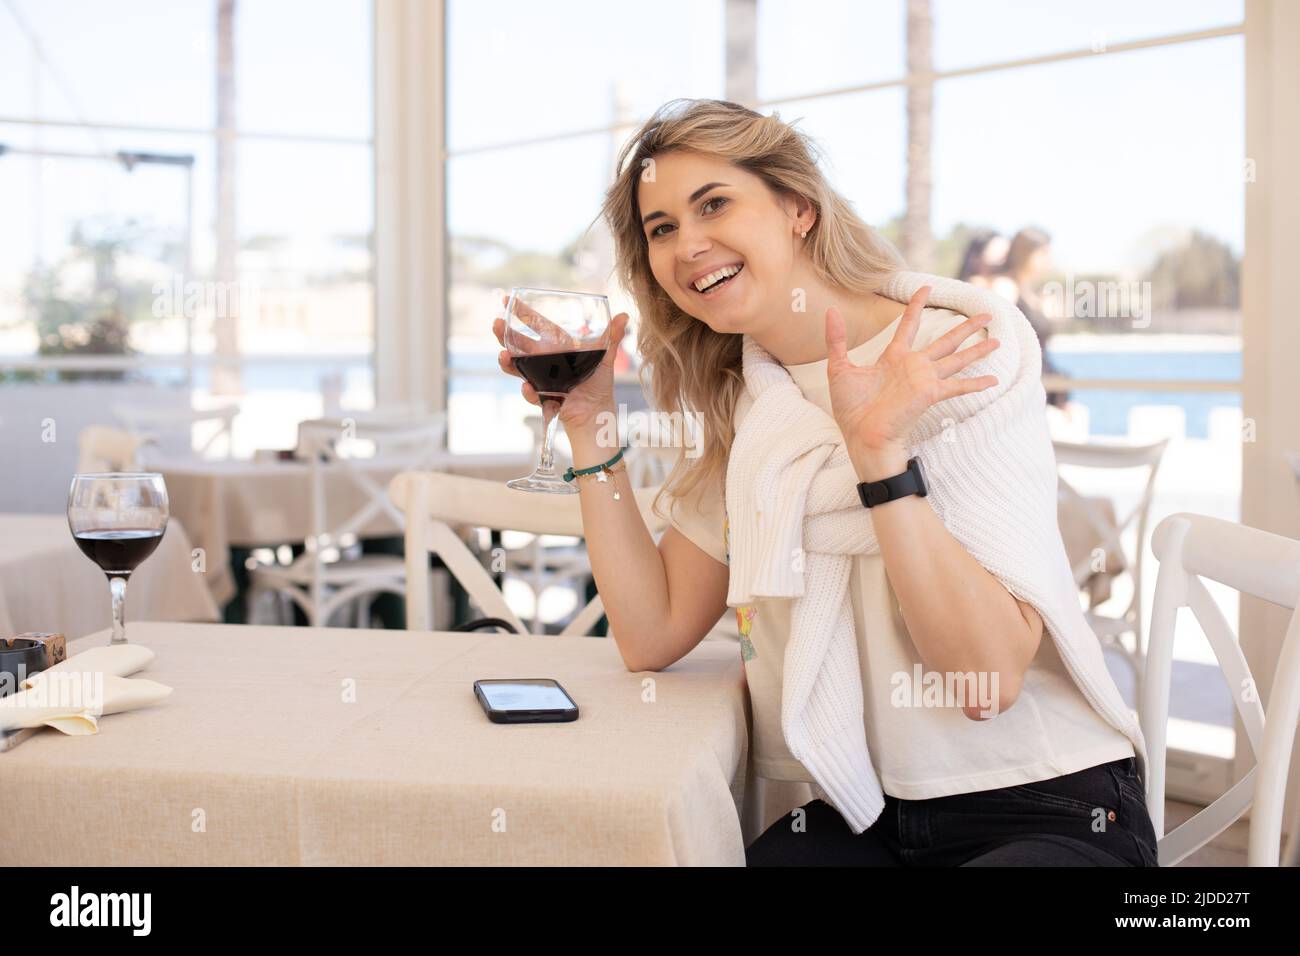 Portrait of young happy woman sitting at table near smartphone, holding glass of wine in cafe, spreading hands greeting. Stock Photo